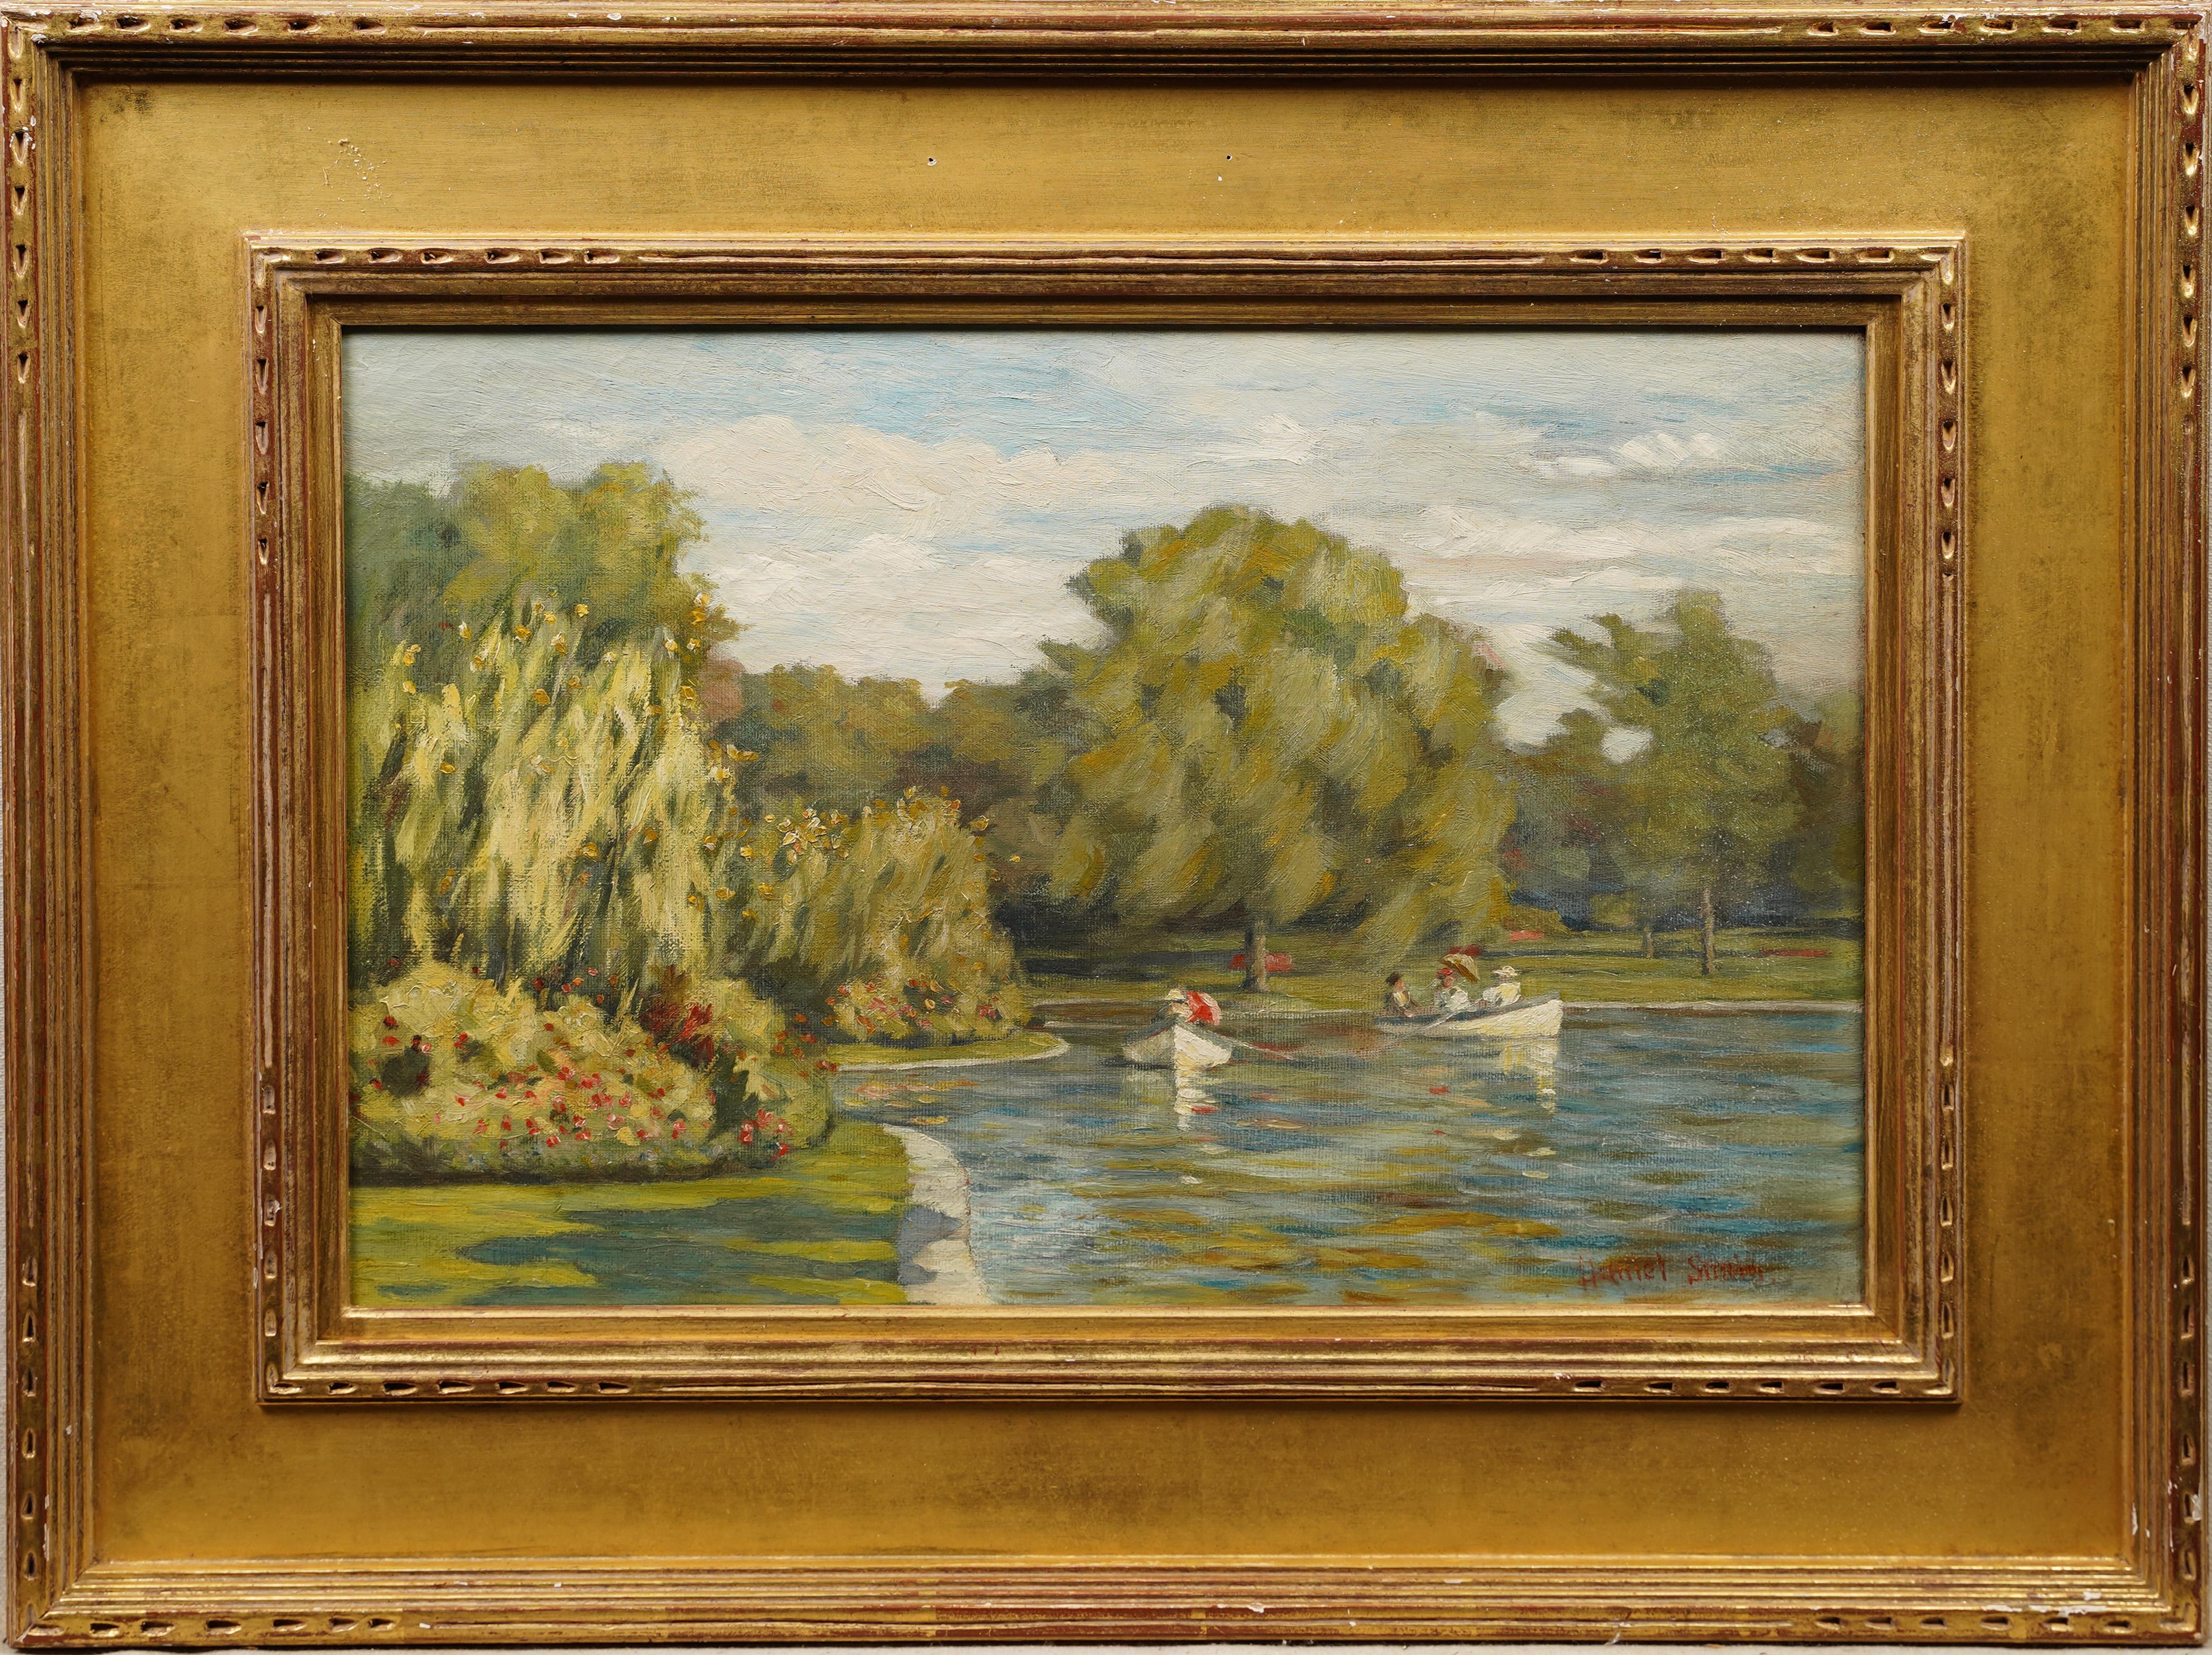 Unknown Landscape Painting - 19th Century Female Boston School Public Gardens Swan Boat Framed Oil Painting